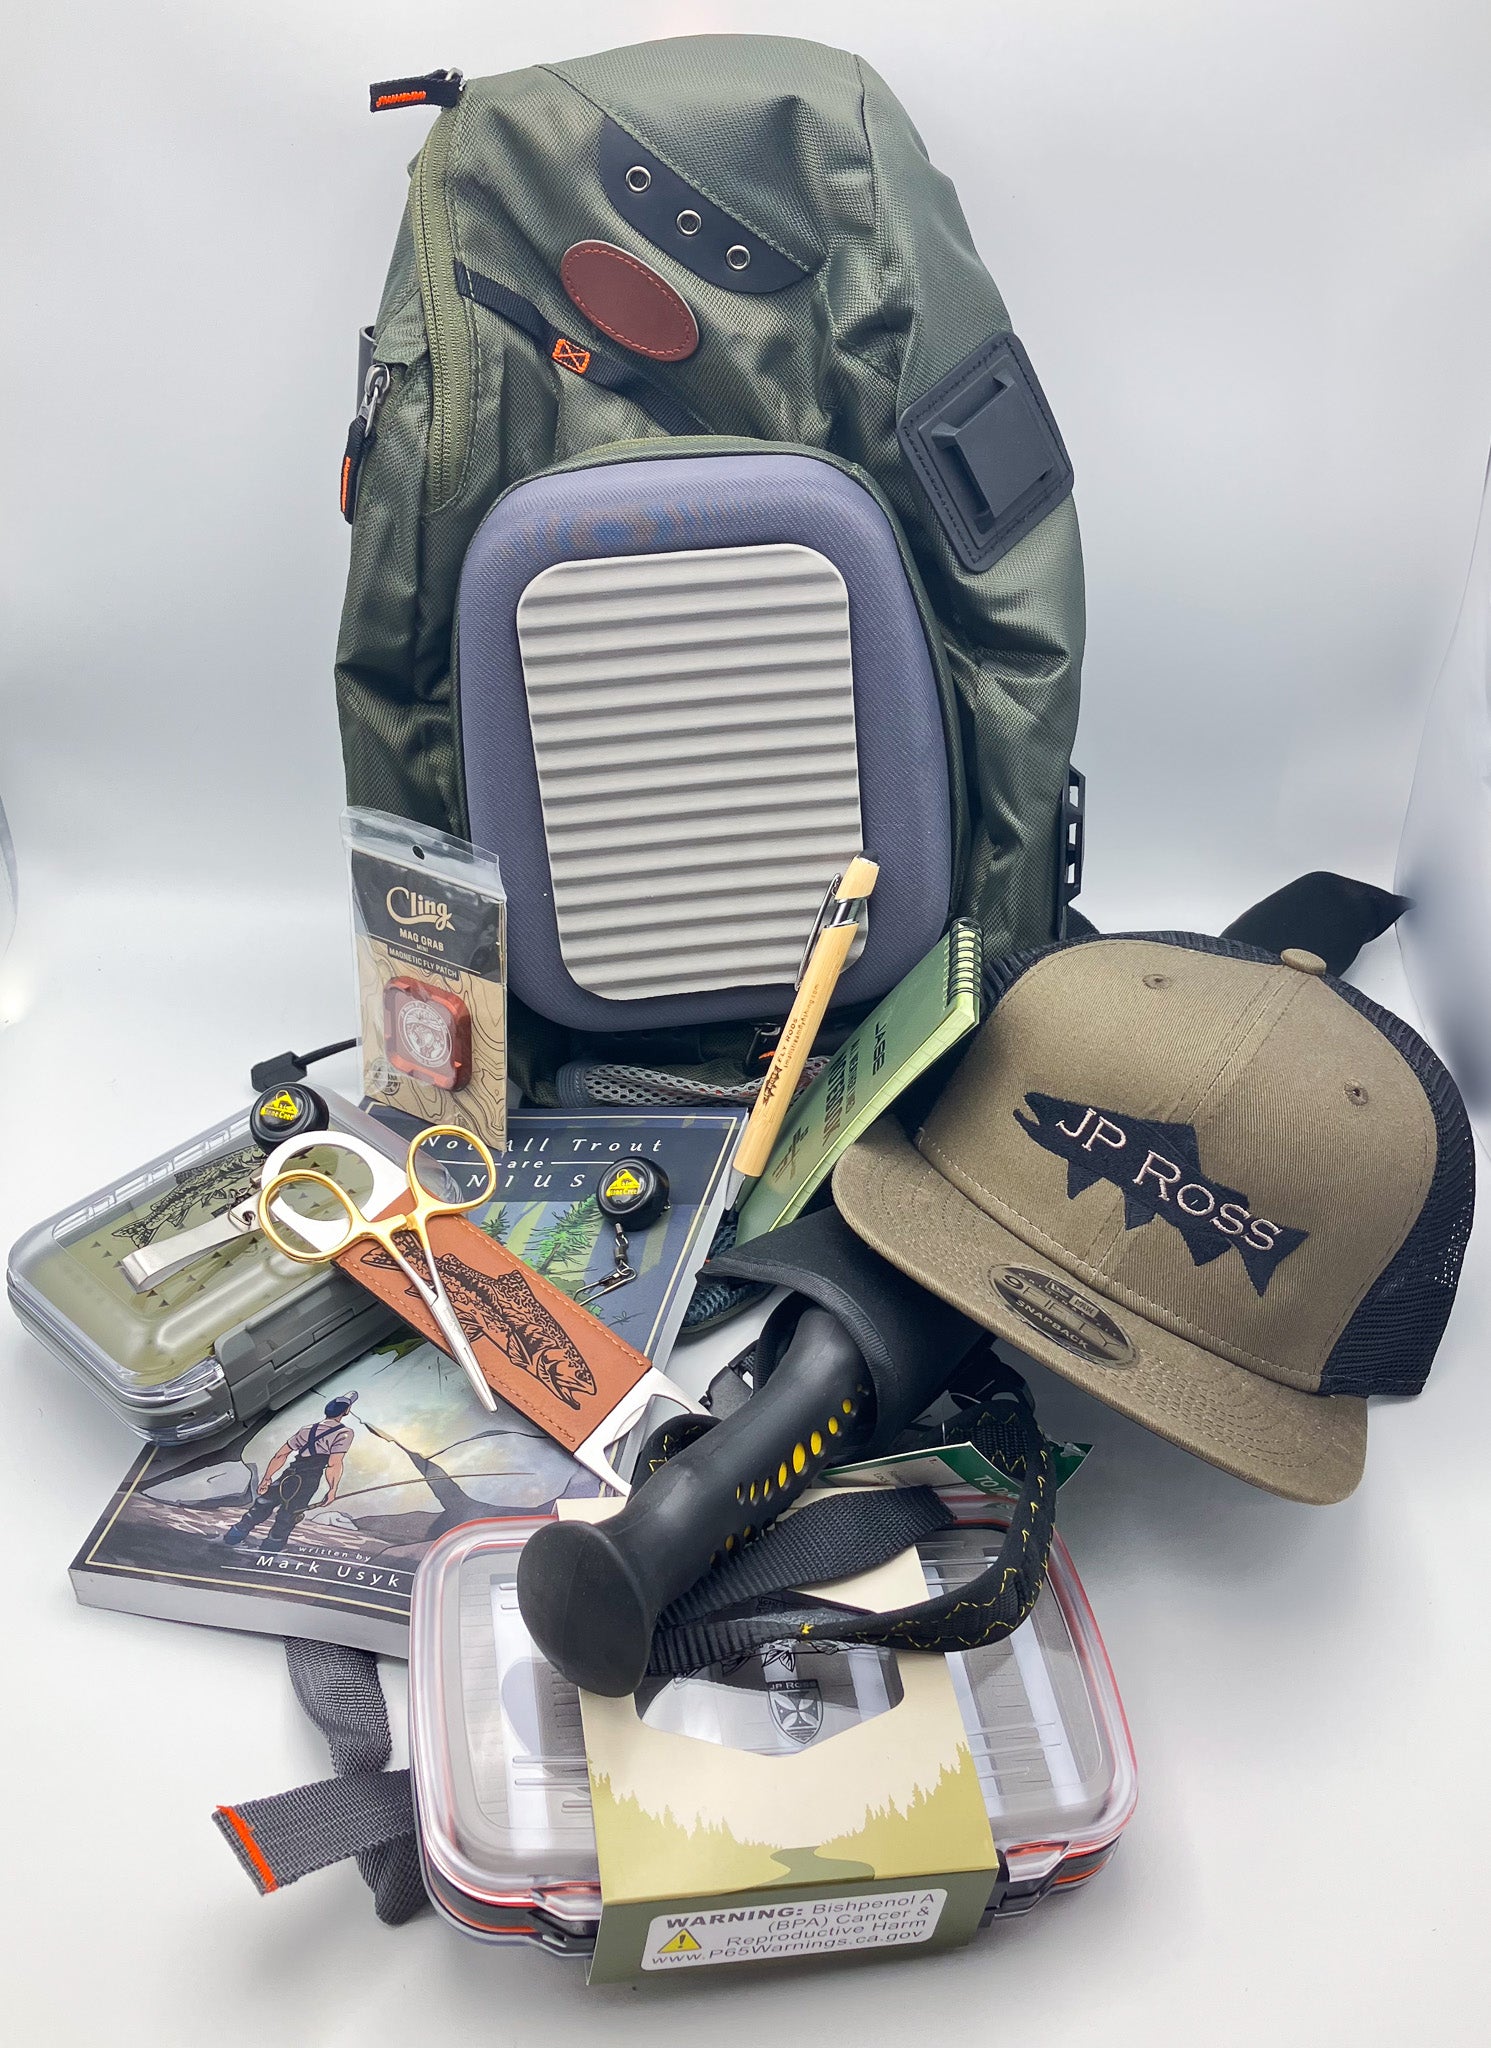 Small Stream Survival Kit, limited qty of 4 ONLY.